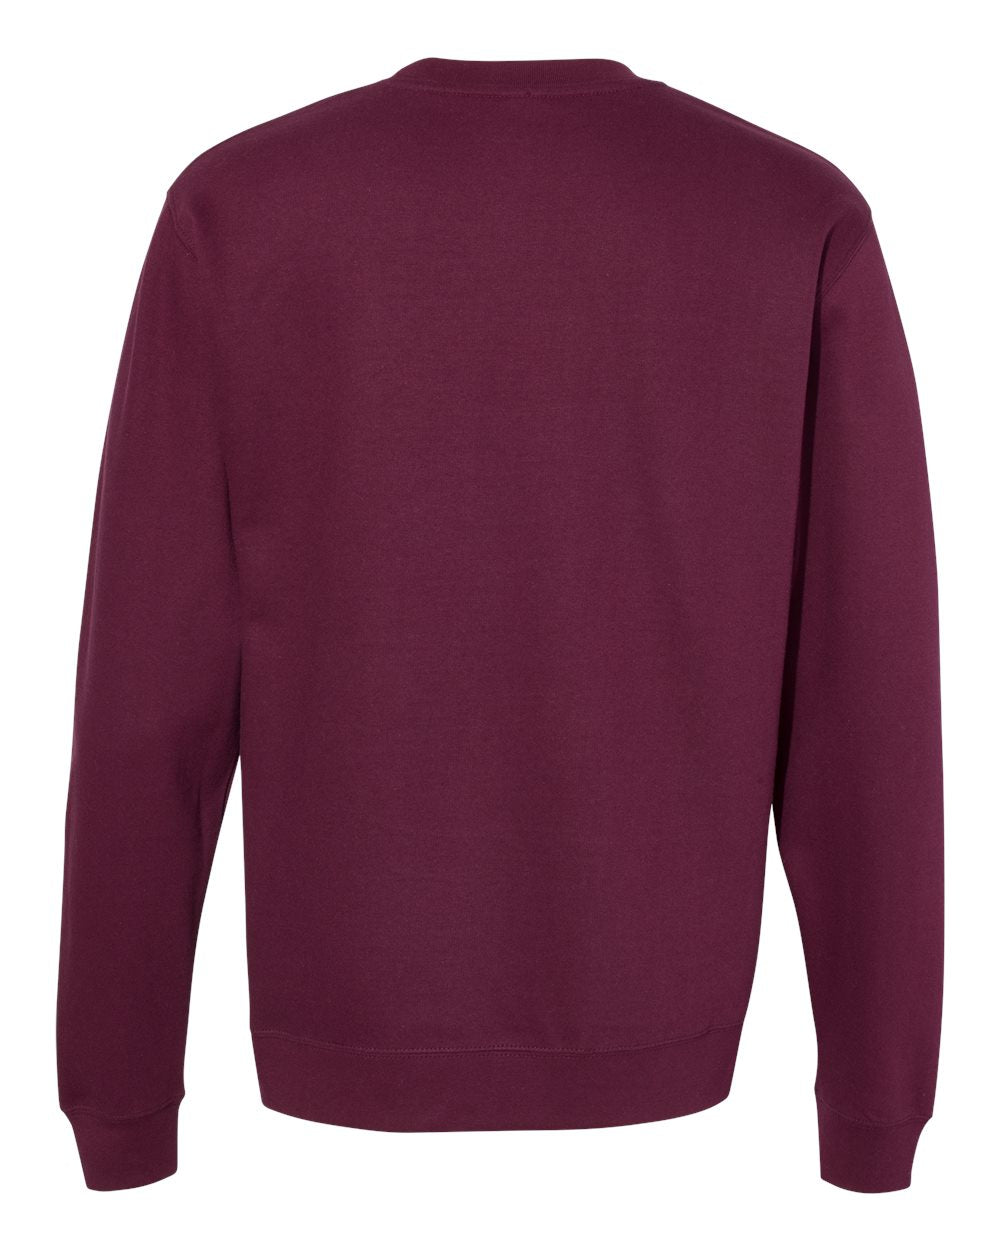 Independent Trading Co. Midweight Sweatshirt SS3000 #color_Maroon